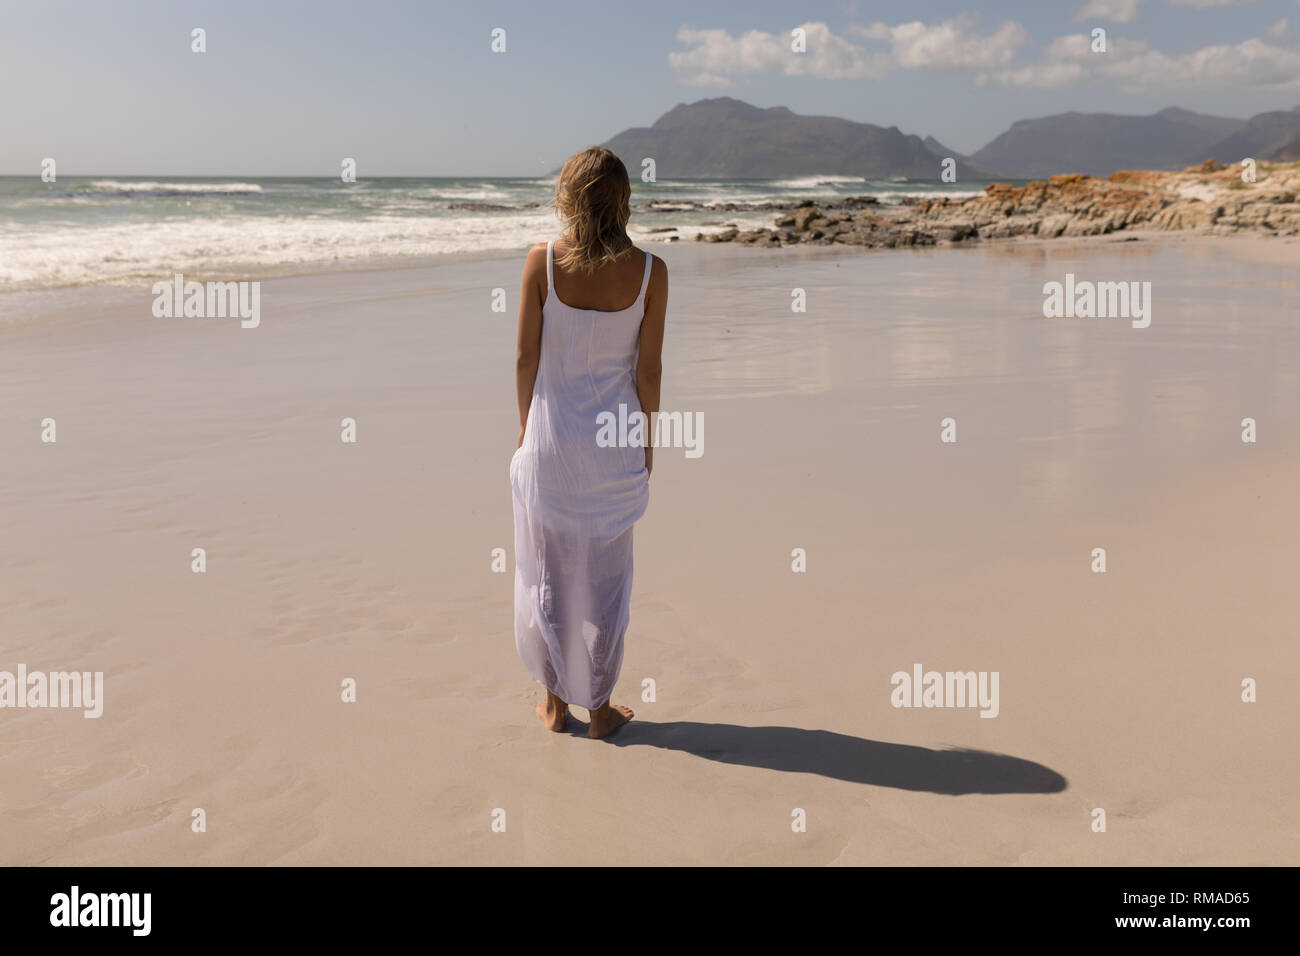 Young woman standing on beach Banque D'Images